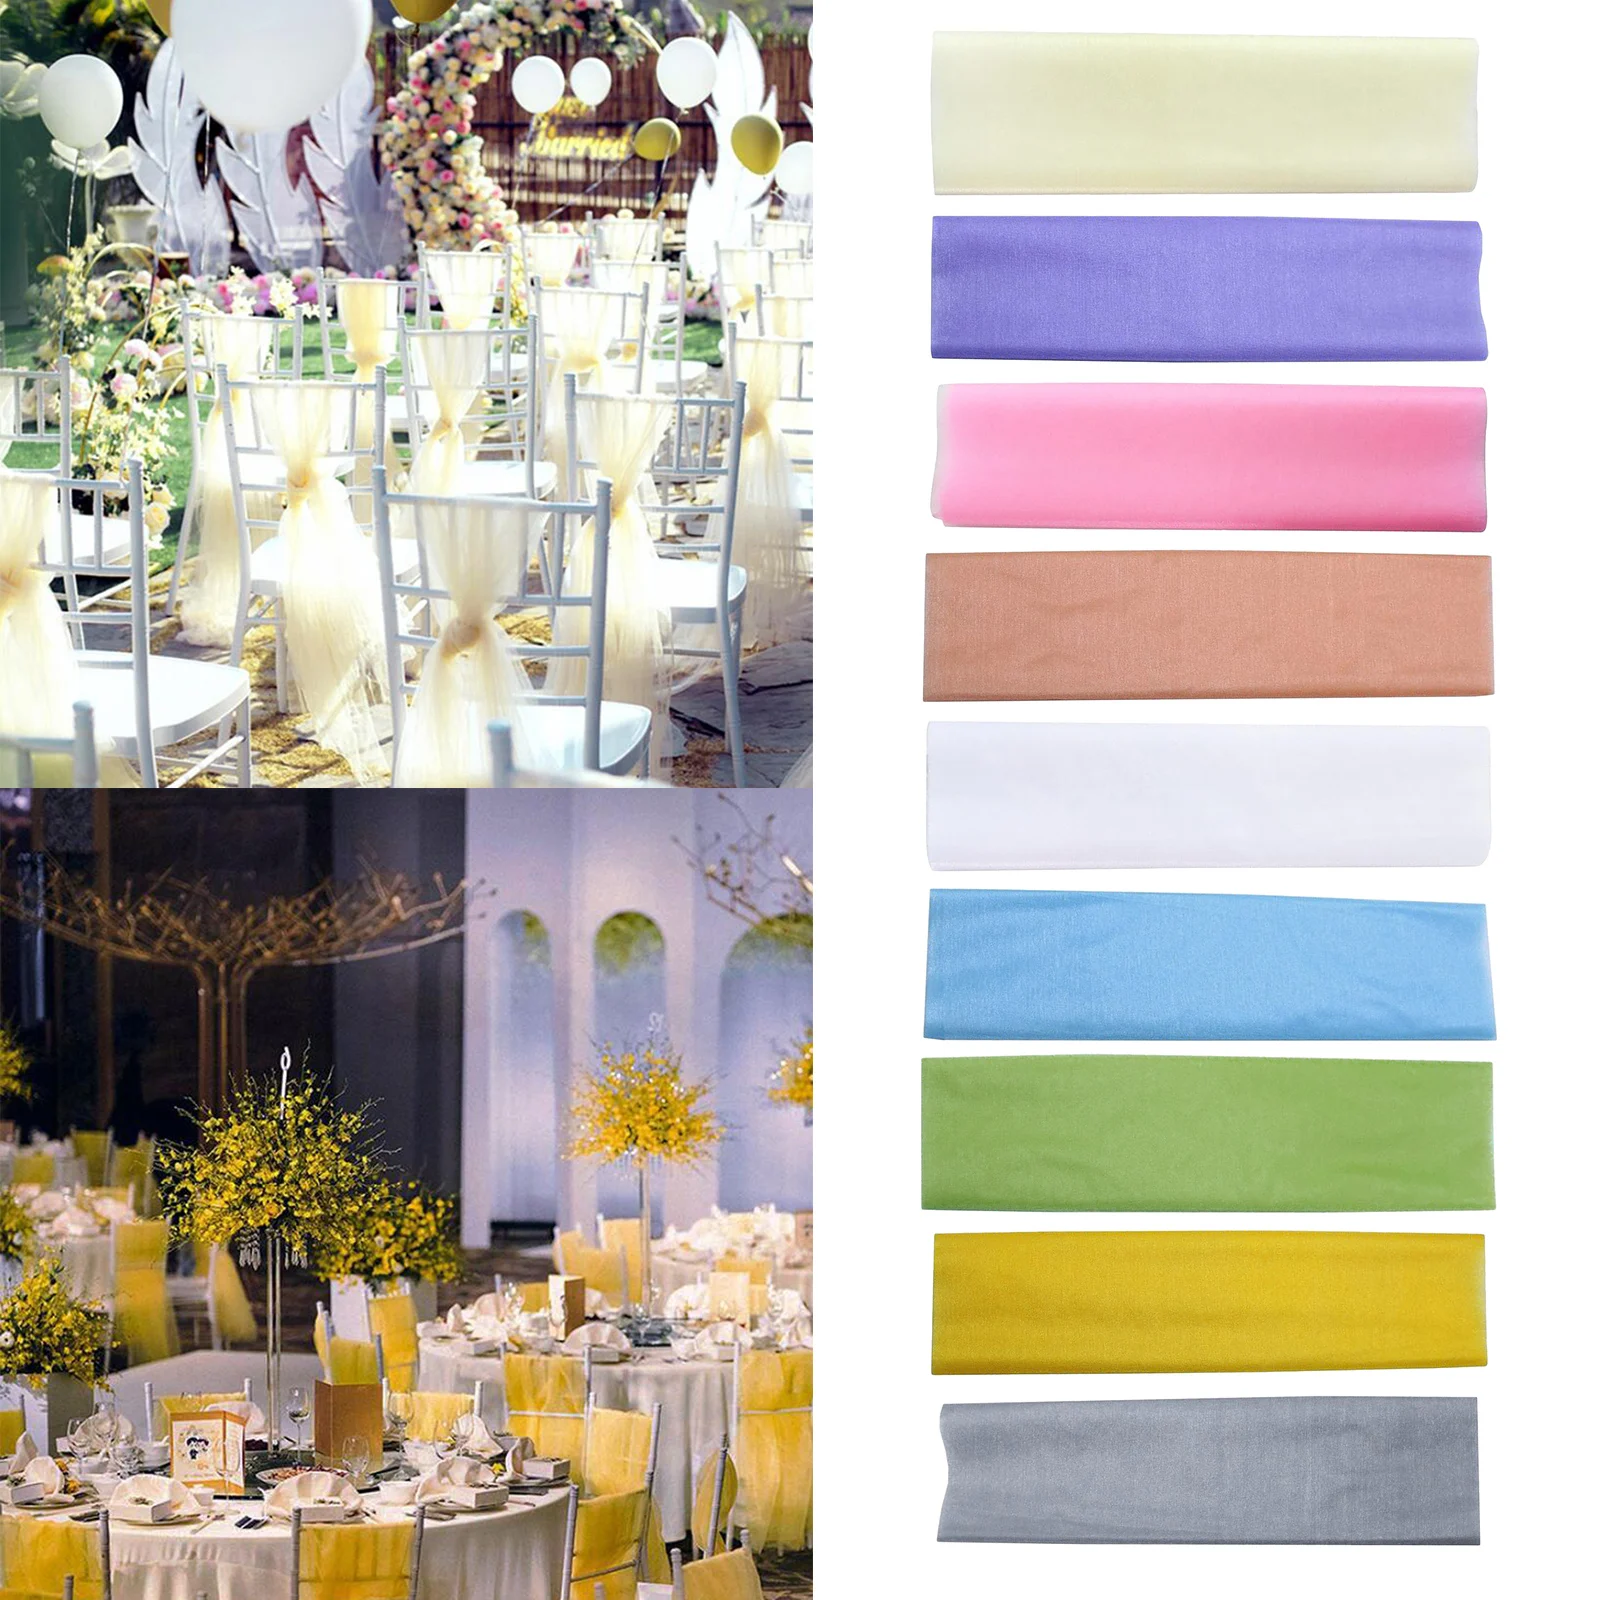 Sheer Chair for Sewing Decorations Wedding Birthday Party Table Centerpieces 10m